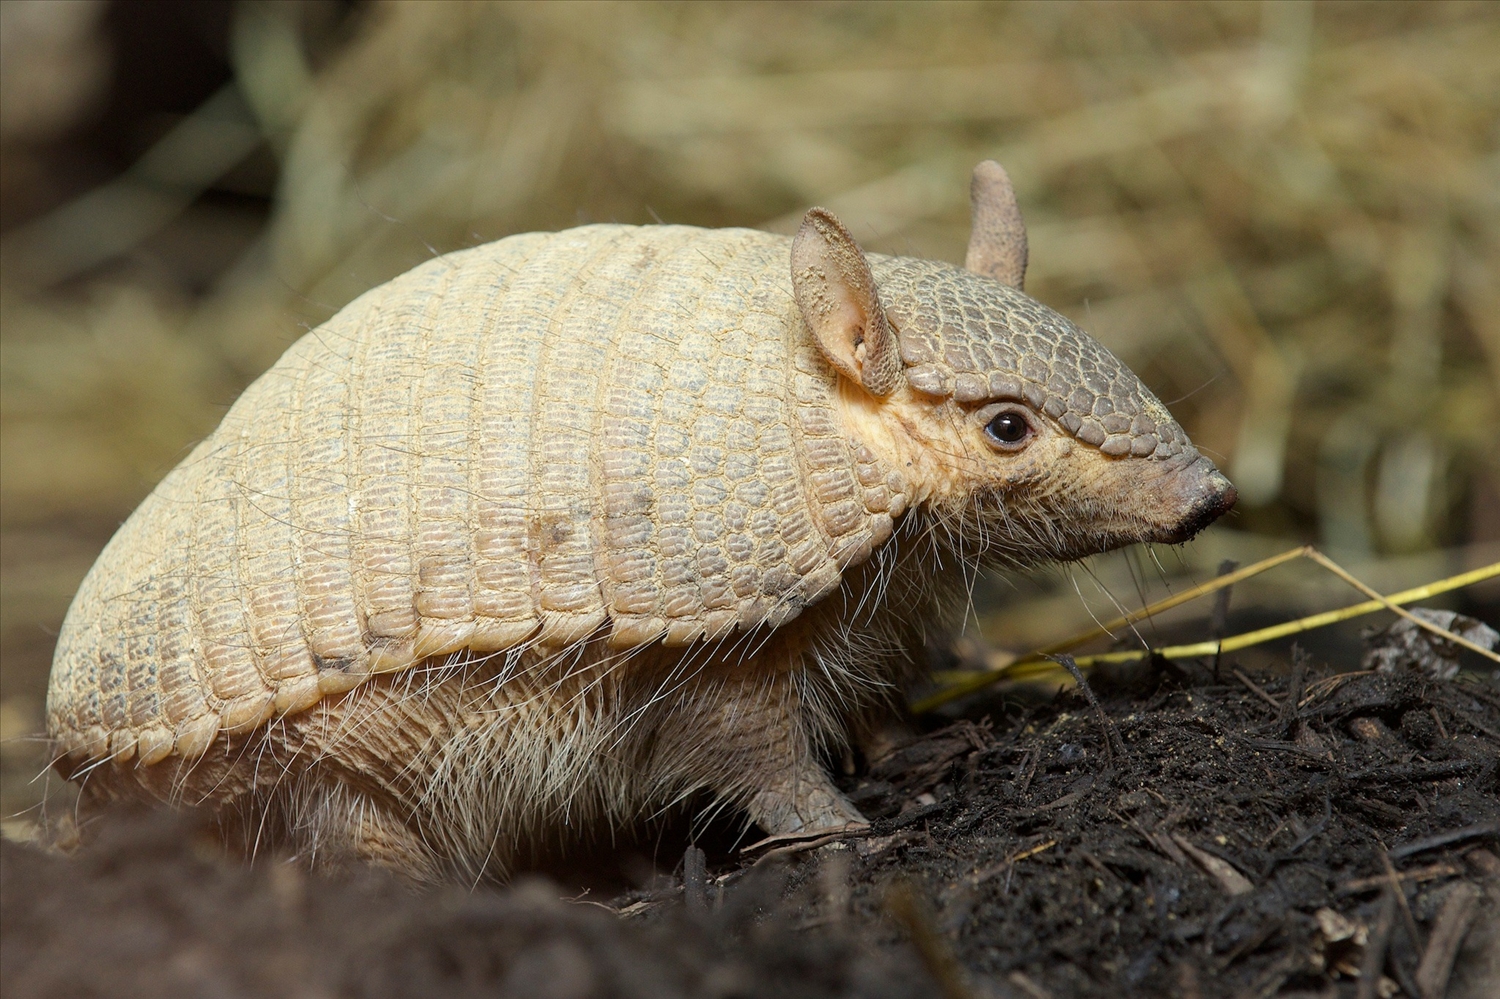 Screaming for the weekend? Here’s a critter you may be able to relate to: the screaming hairy armadillo (Chaetophractus vellerosus)! When under threat, this armored mammal lets out a loud squeal. Relative to other armadillo species, it has more hair on its body. This animal inhabits deserts, scrublands, and forests across Bolivia, Paraguay, and Argentina, where it lives in deep underground burrows.